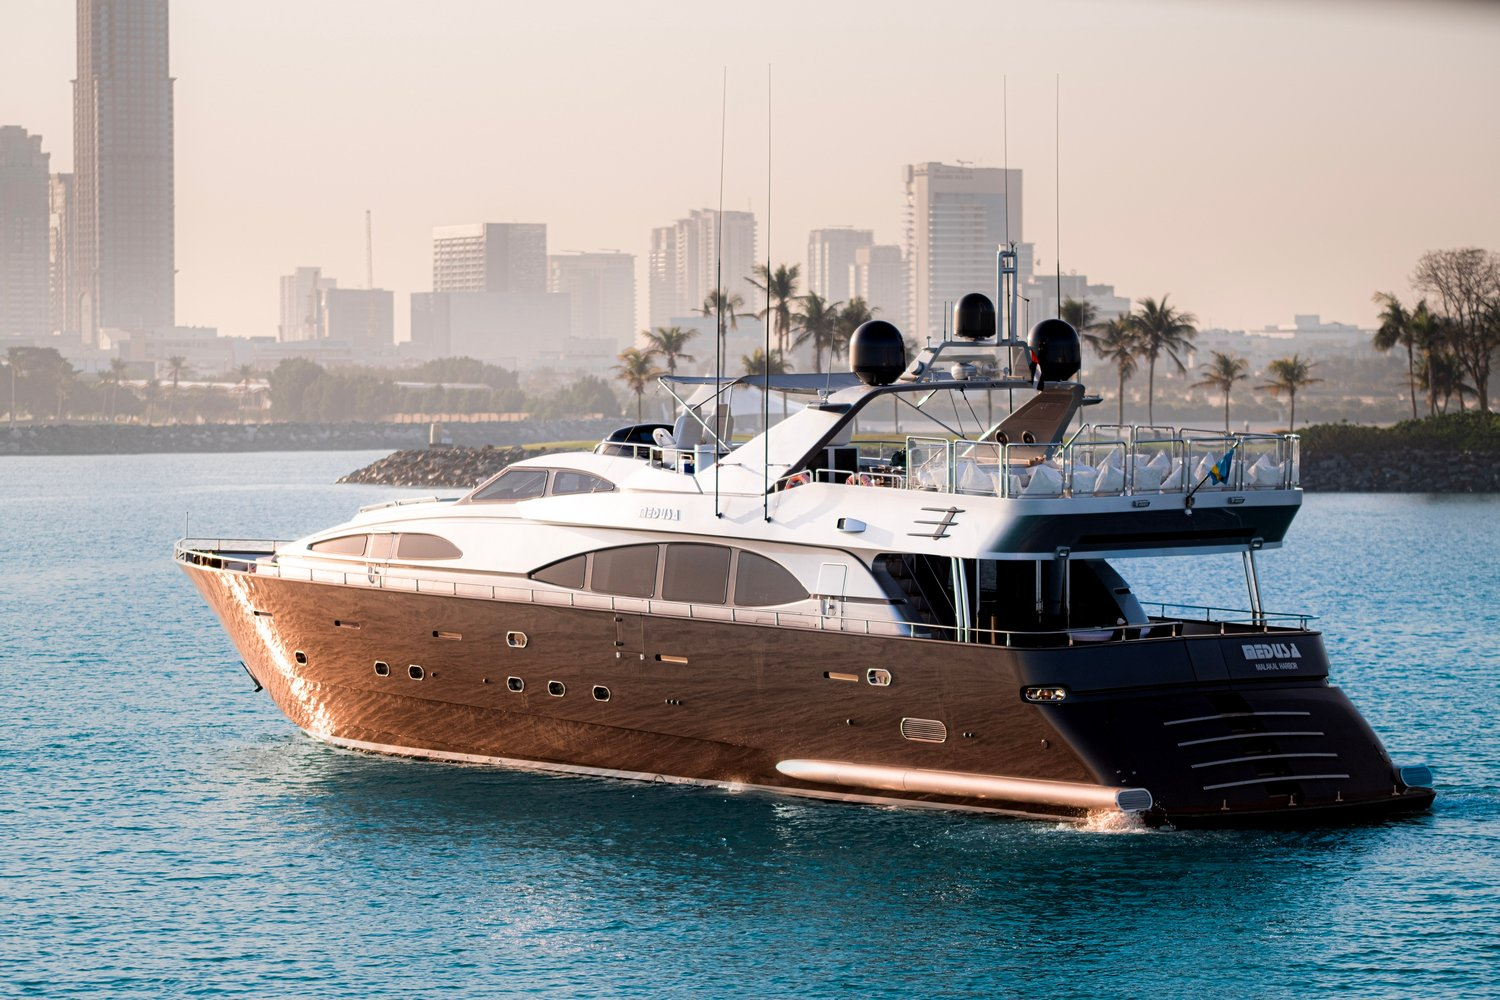 Yacht Rental Options For First-Timers